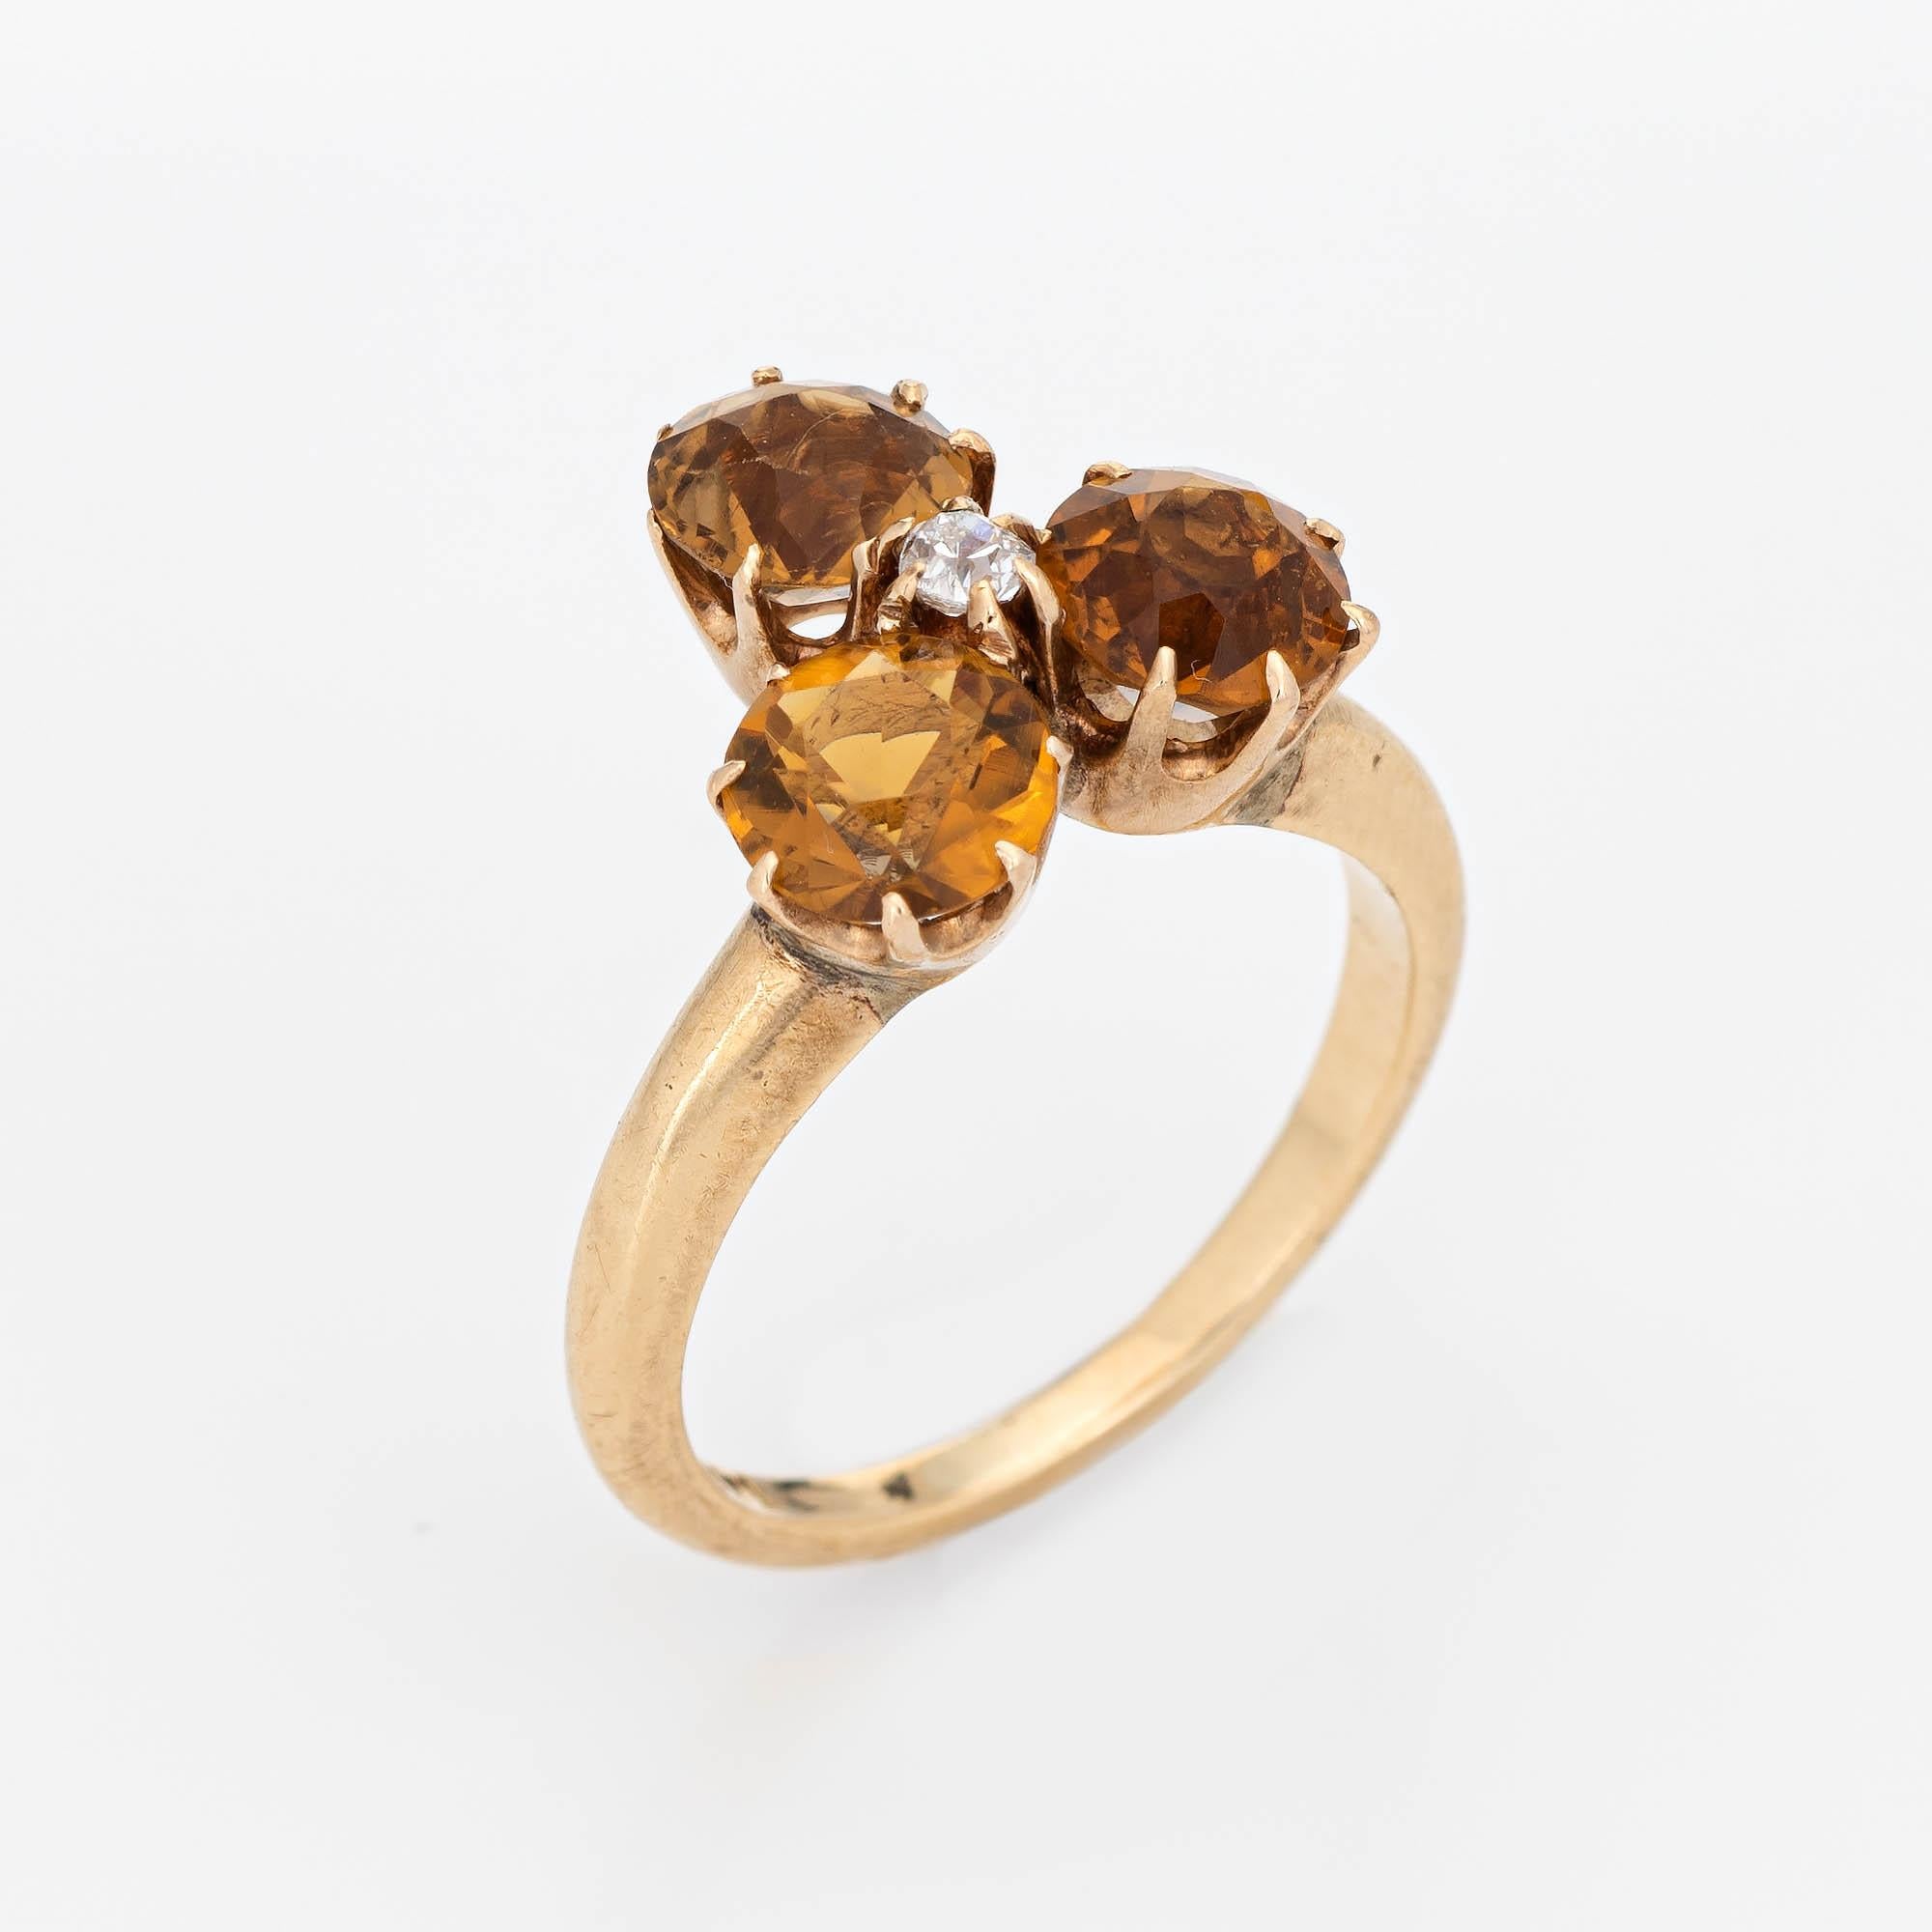 Finely detailed antique Victorian citrine & diamond trefoil ring (circa 1880s to 1900s) crafted in 14 karat yellow gold. 

Three estimated 0.40 carat citrines total an estimated 1.20 carats. The old mine cut diamond is estimated at 0.05 carats